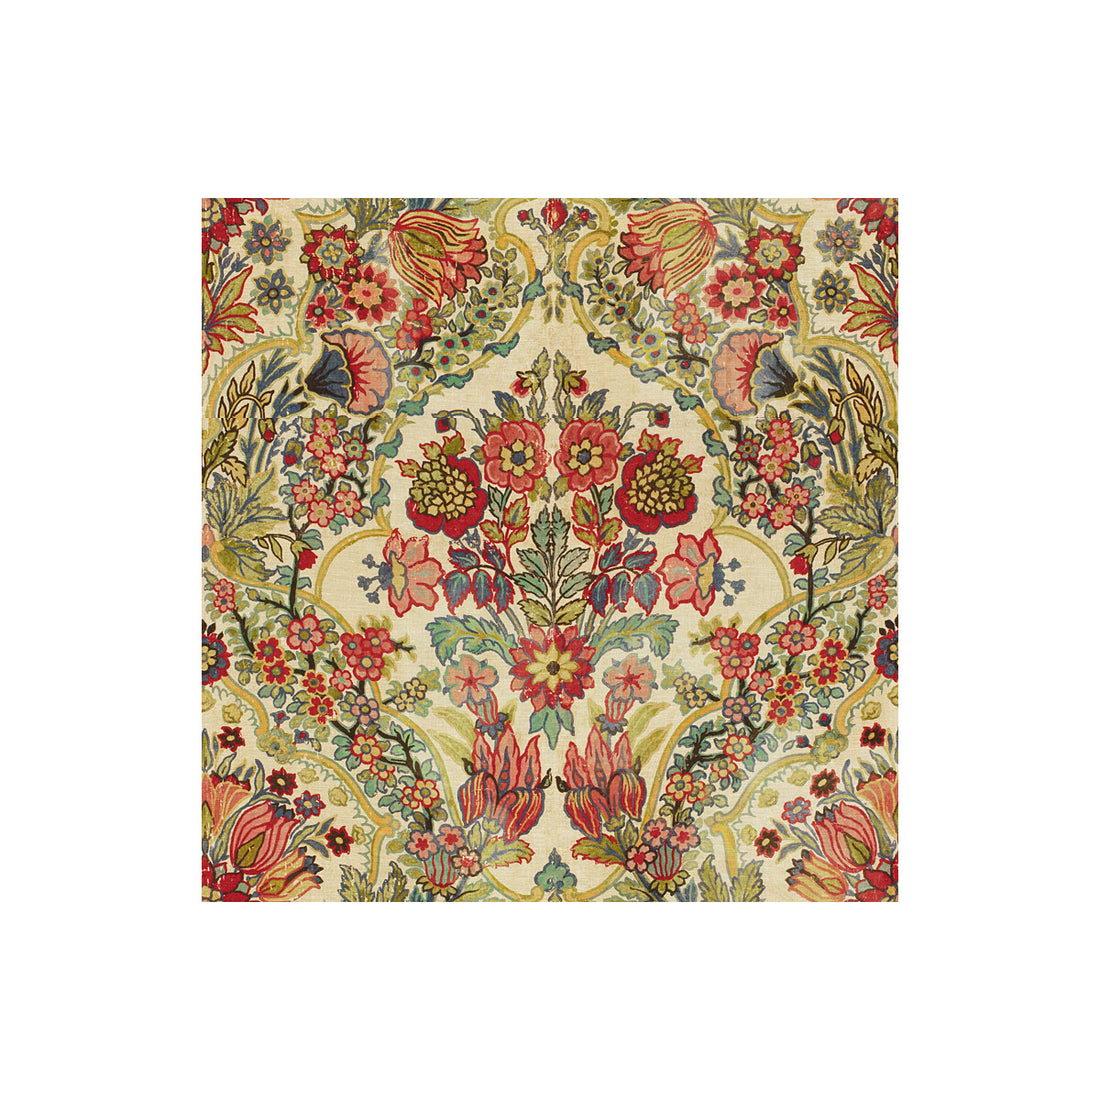 Tetbury fabric in multi color - pattern 2013134.735.0 - by Lee Jofa in the Royal Oak Anniversary collection